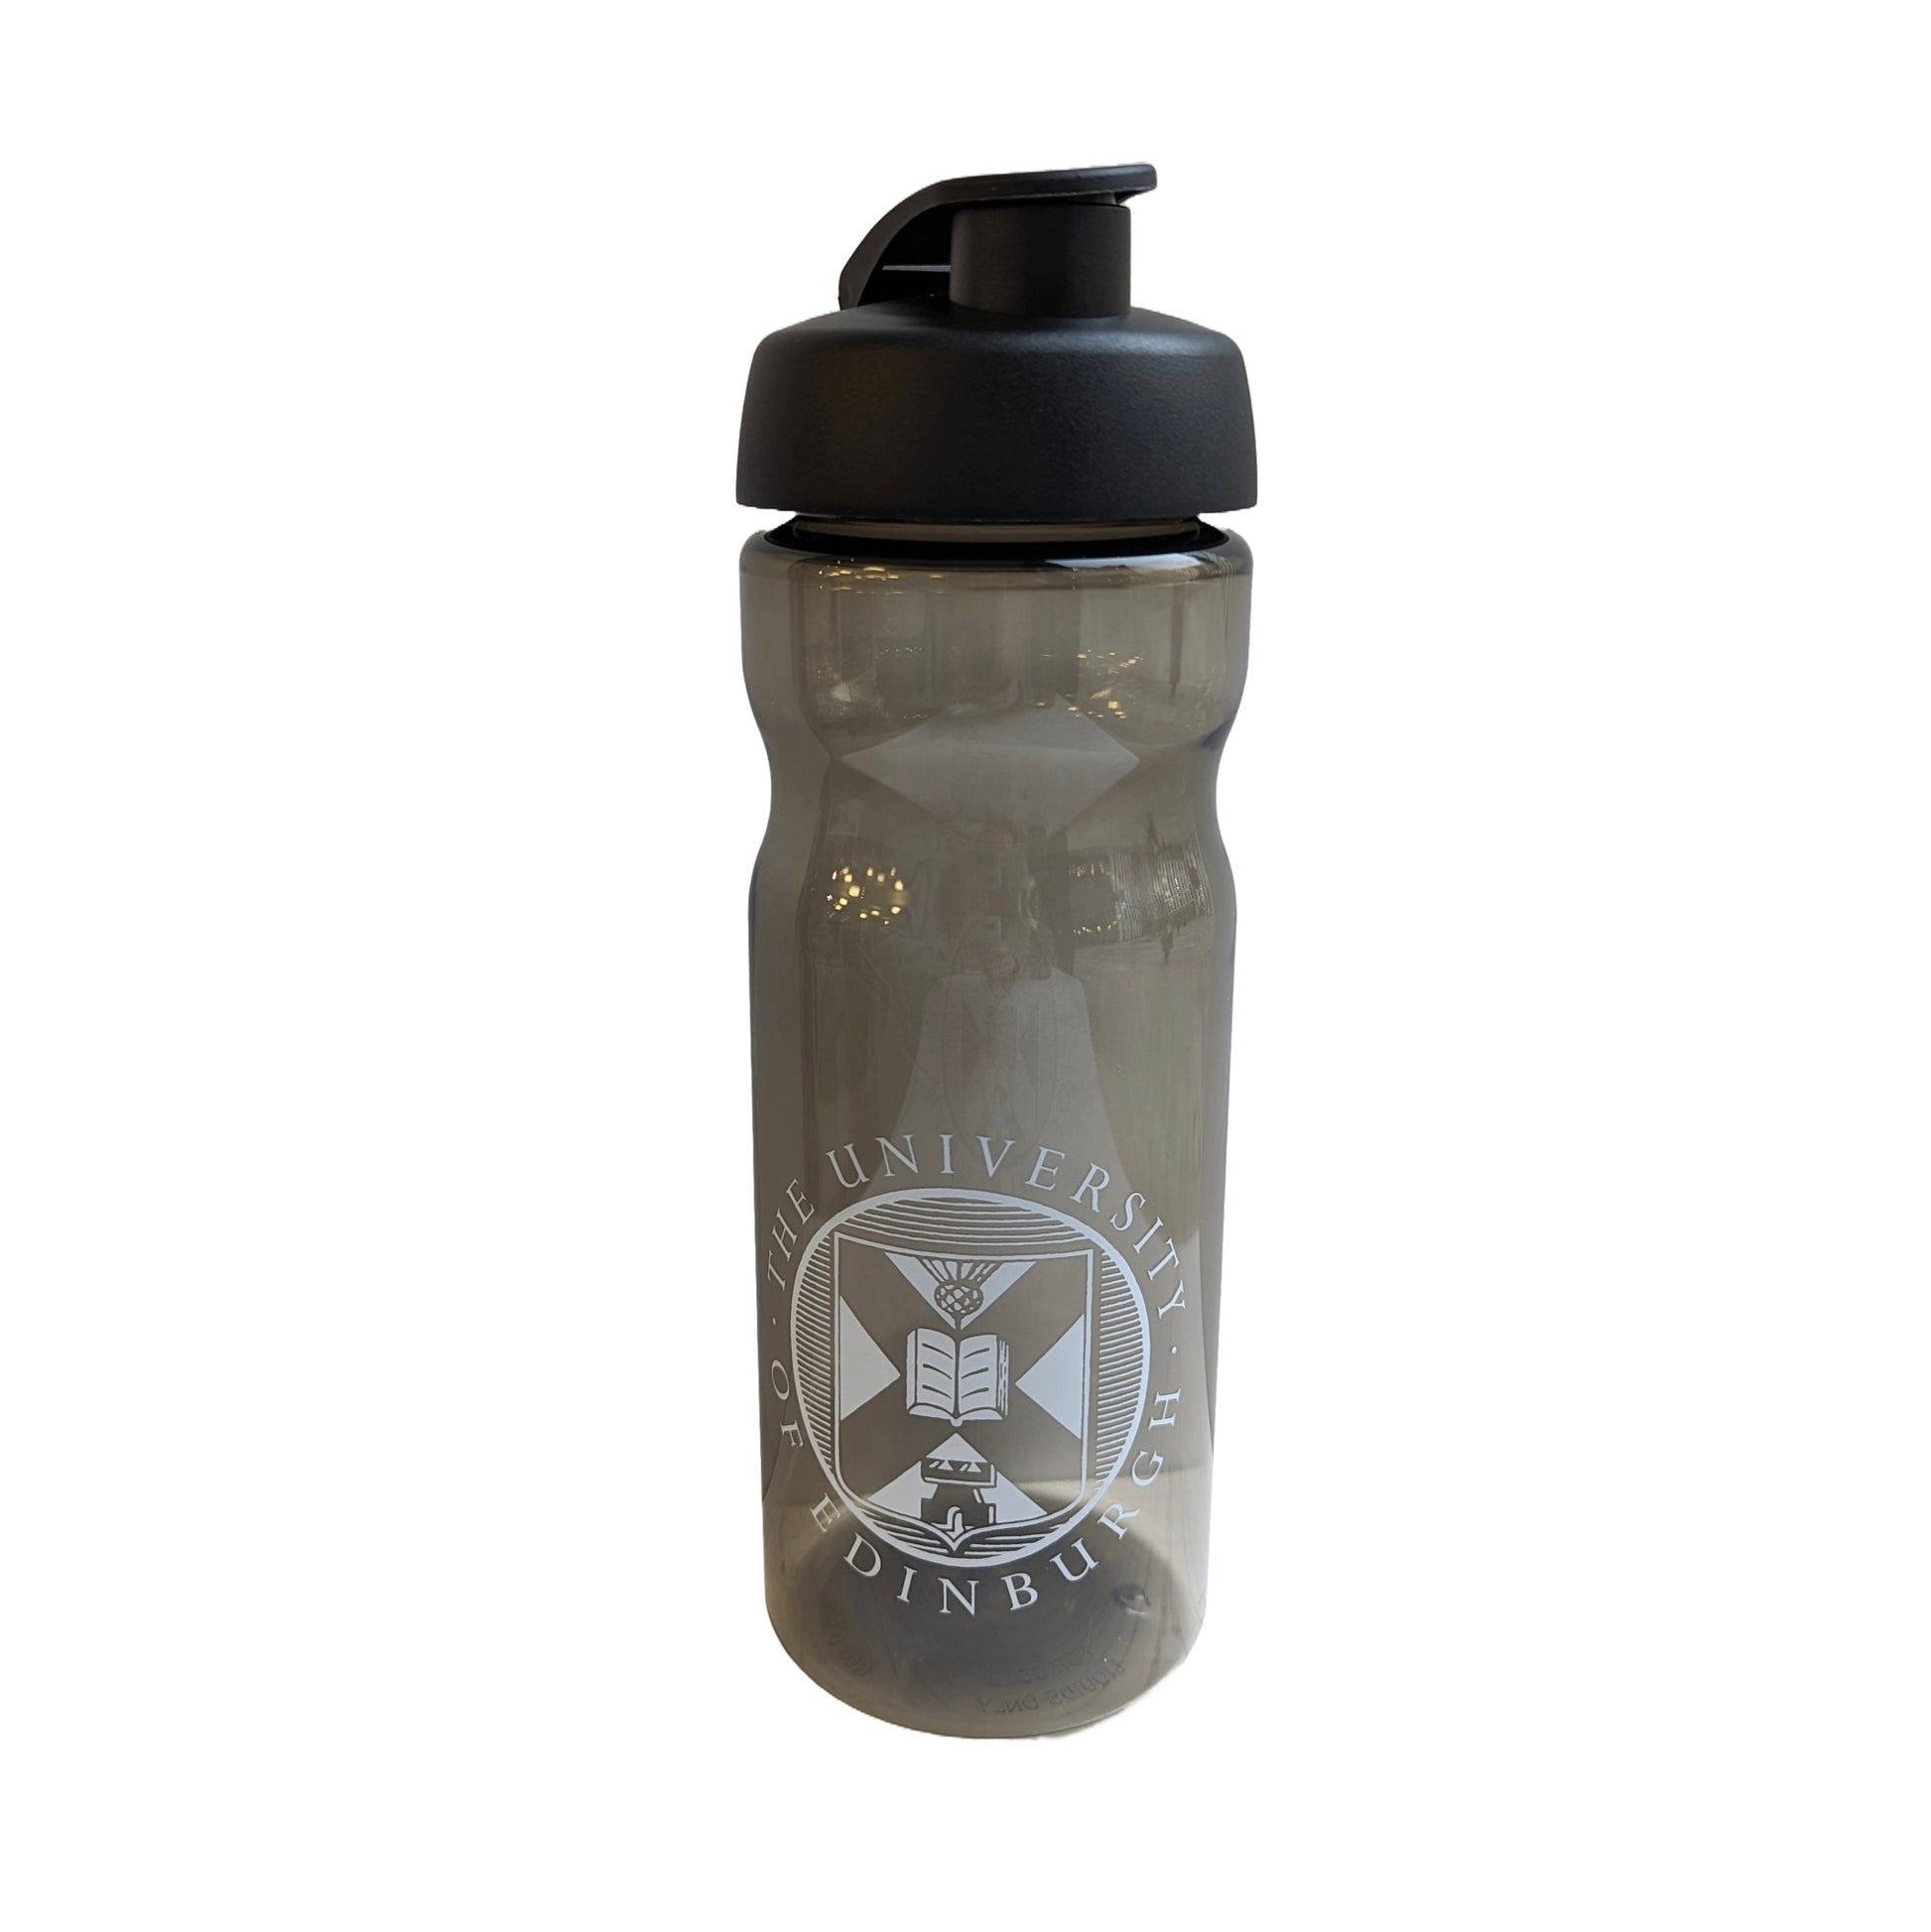 An opaque dark grey water bottle with a white university crest and a black cap